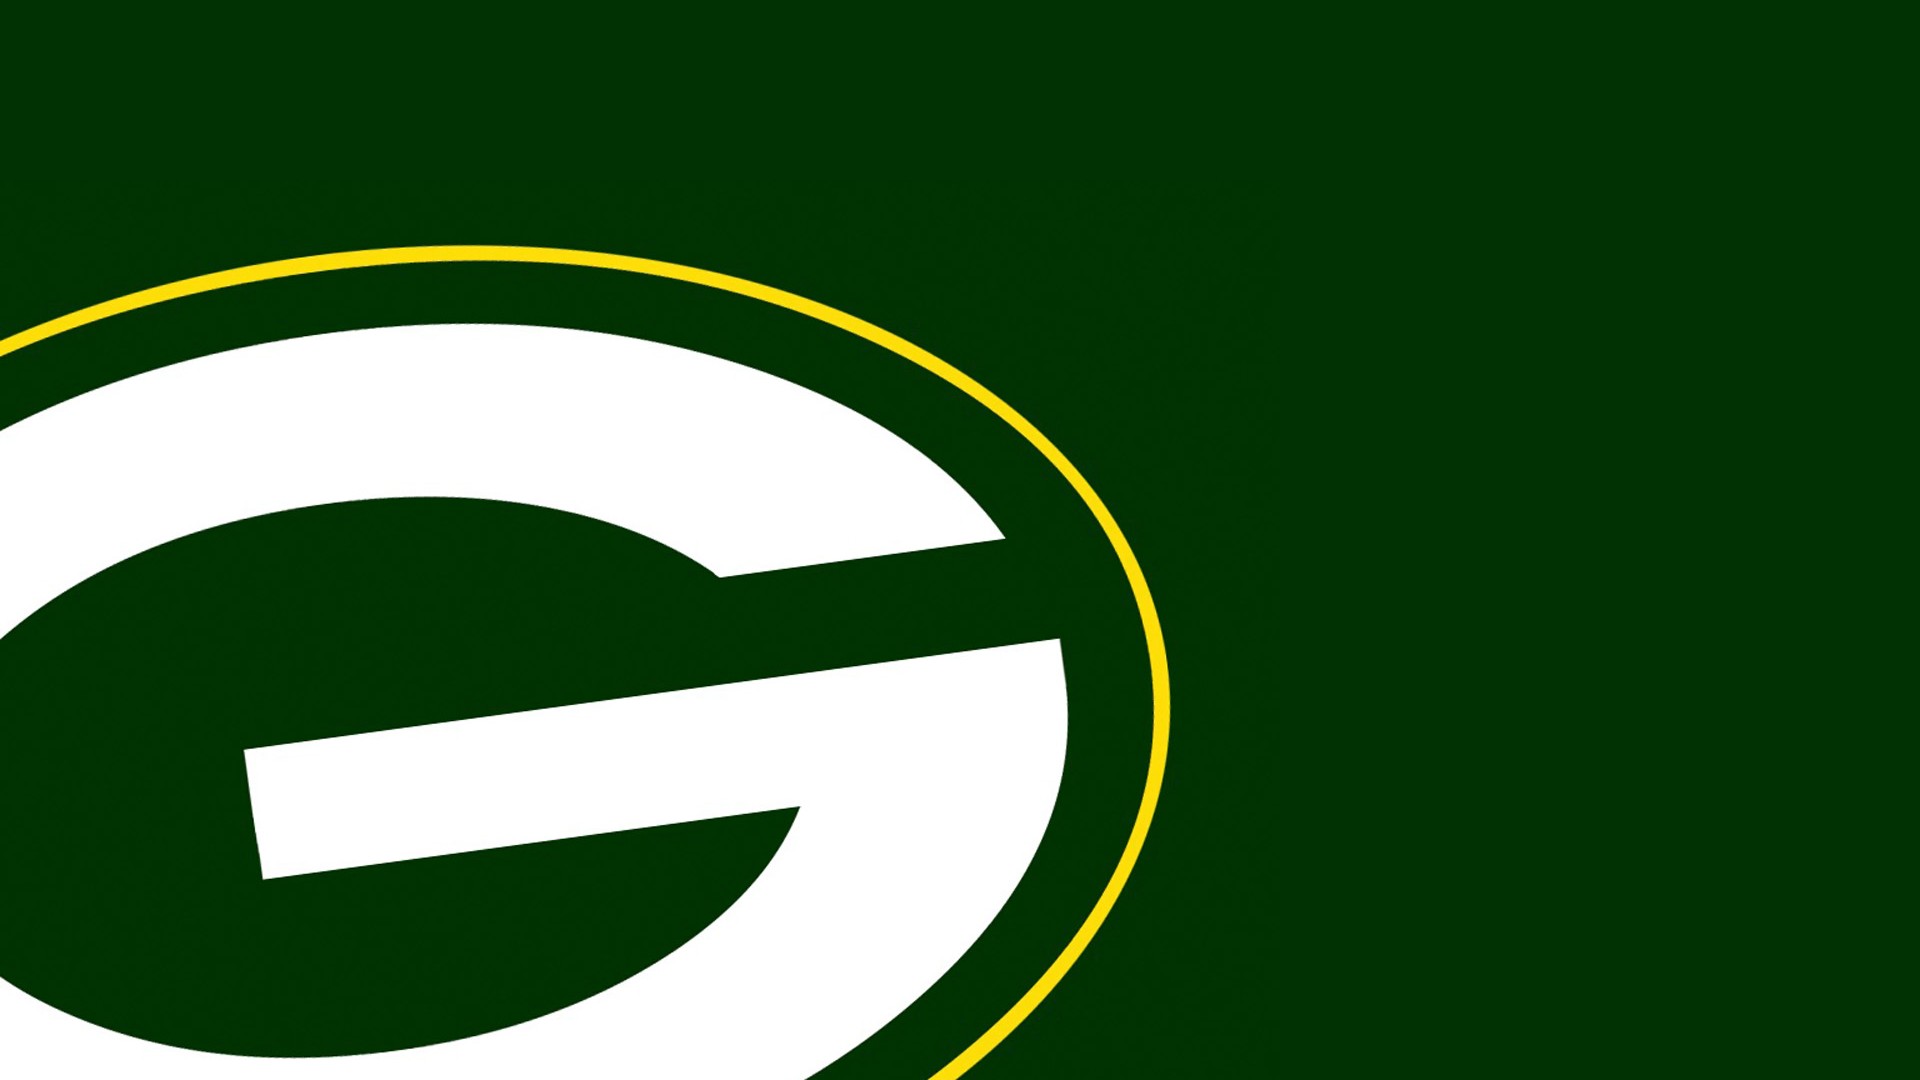 Wallpaper Desktop Green Bay Packers NFL HD with resolution 1920x1080 pixel. You can make this wallpaper for your Mac or Windows Desktop Background, iPhone, Android or Tablet and another Smartphone device